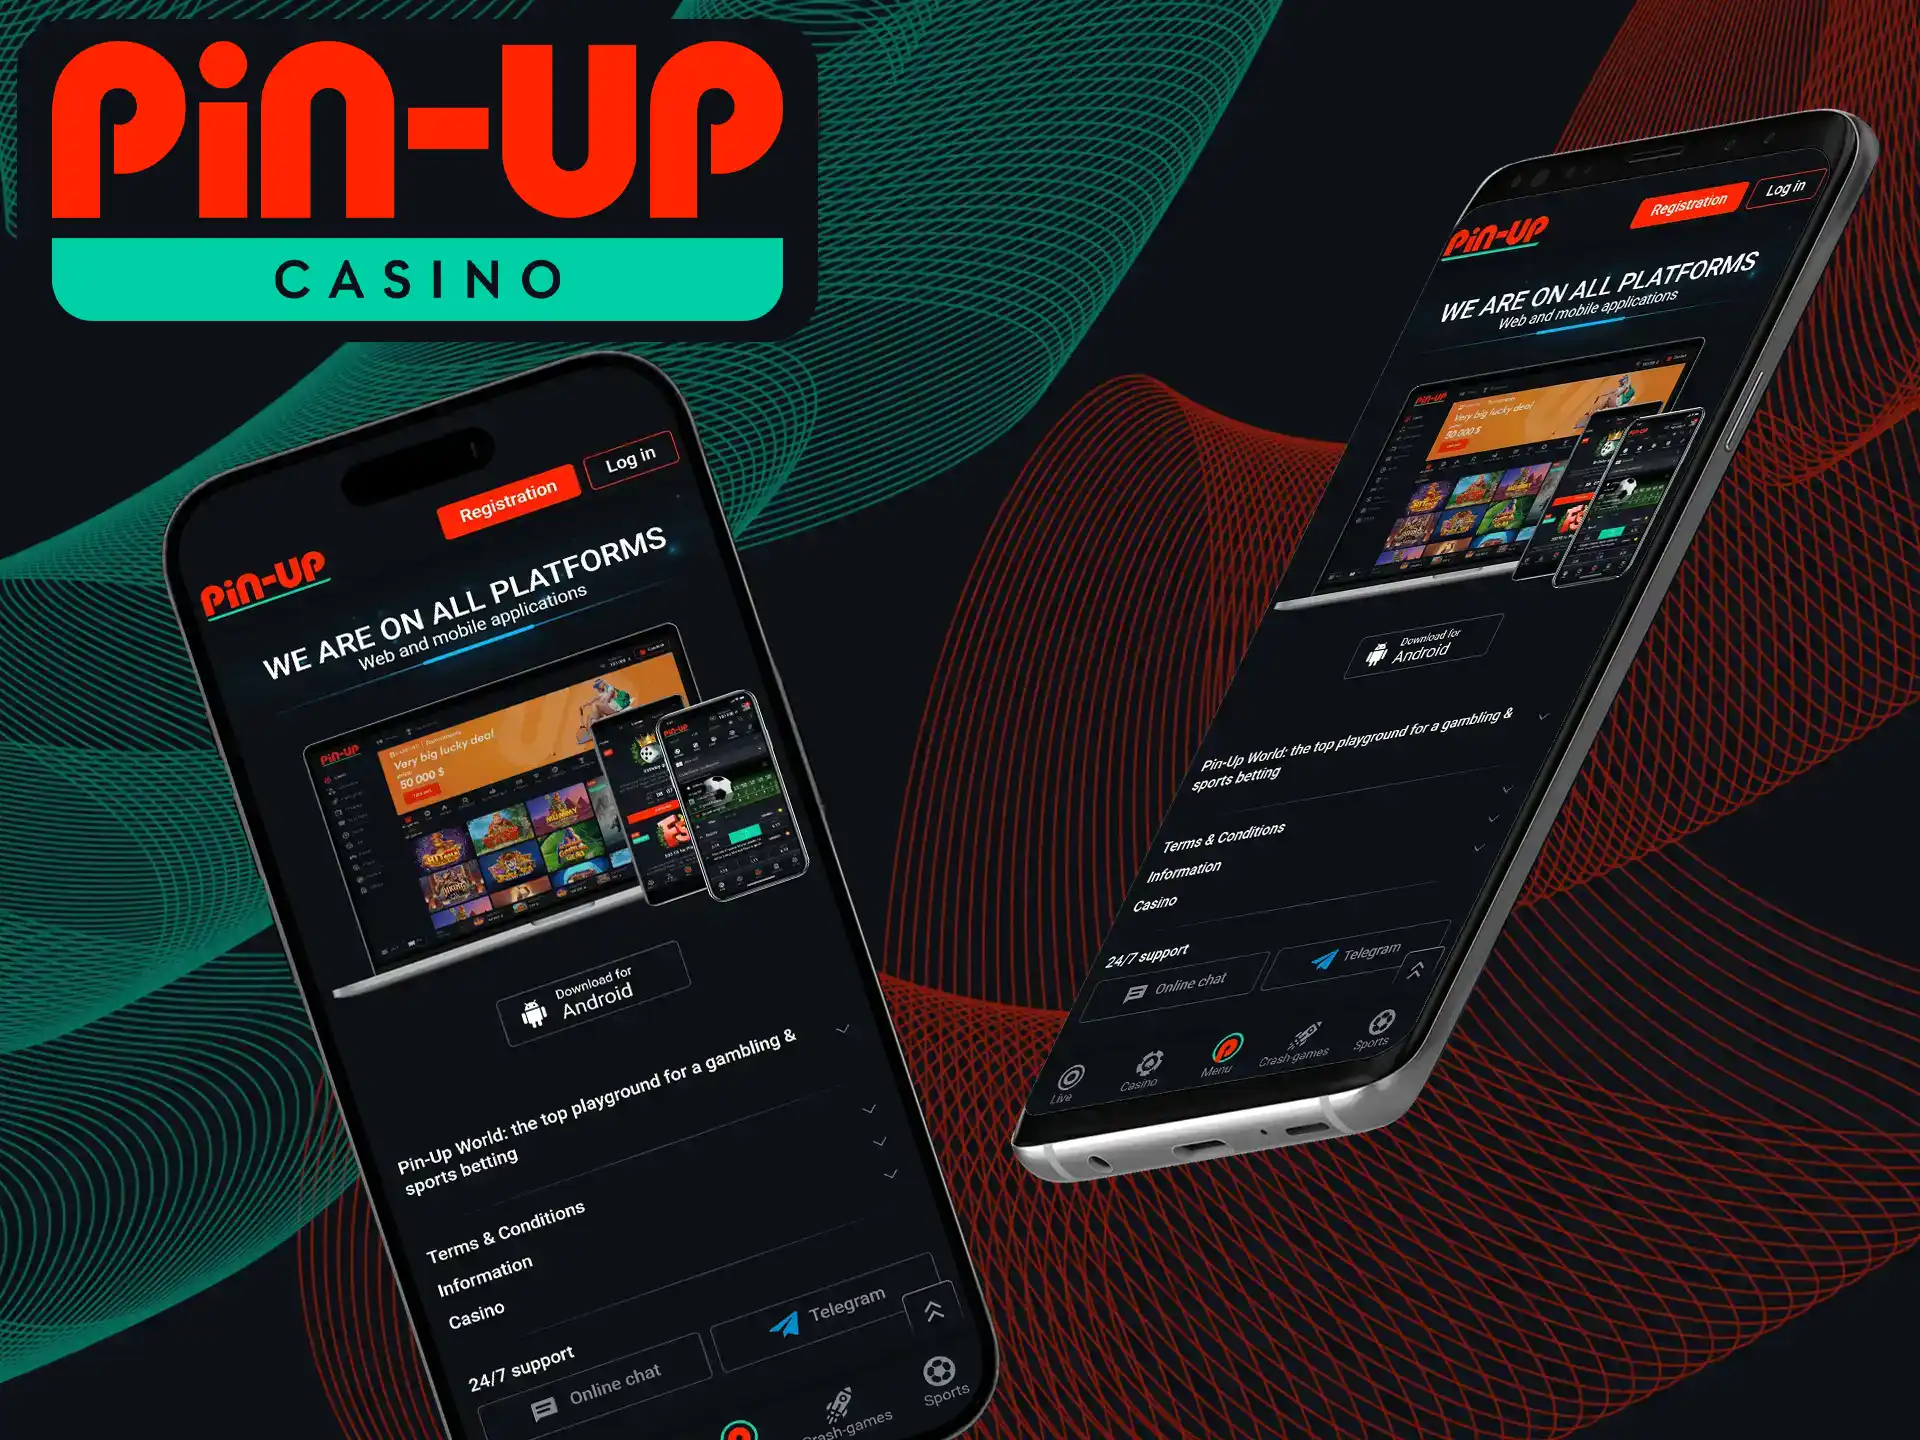 You'll need to follow a couple of steps to launch games at Pin-Up Casino in India.